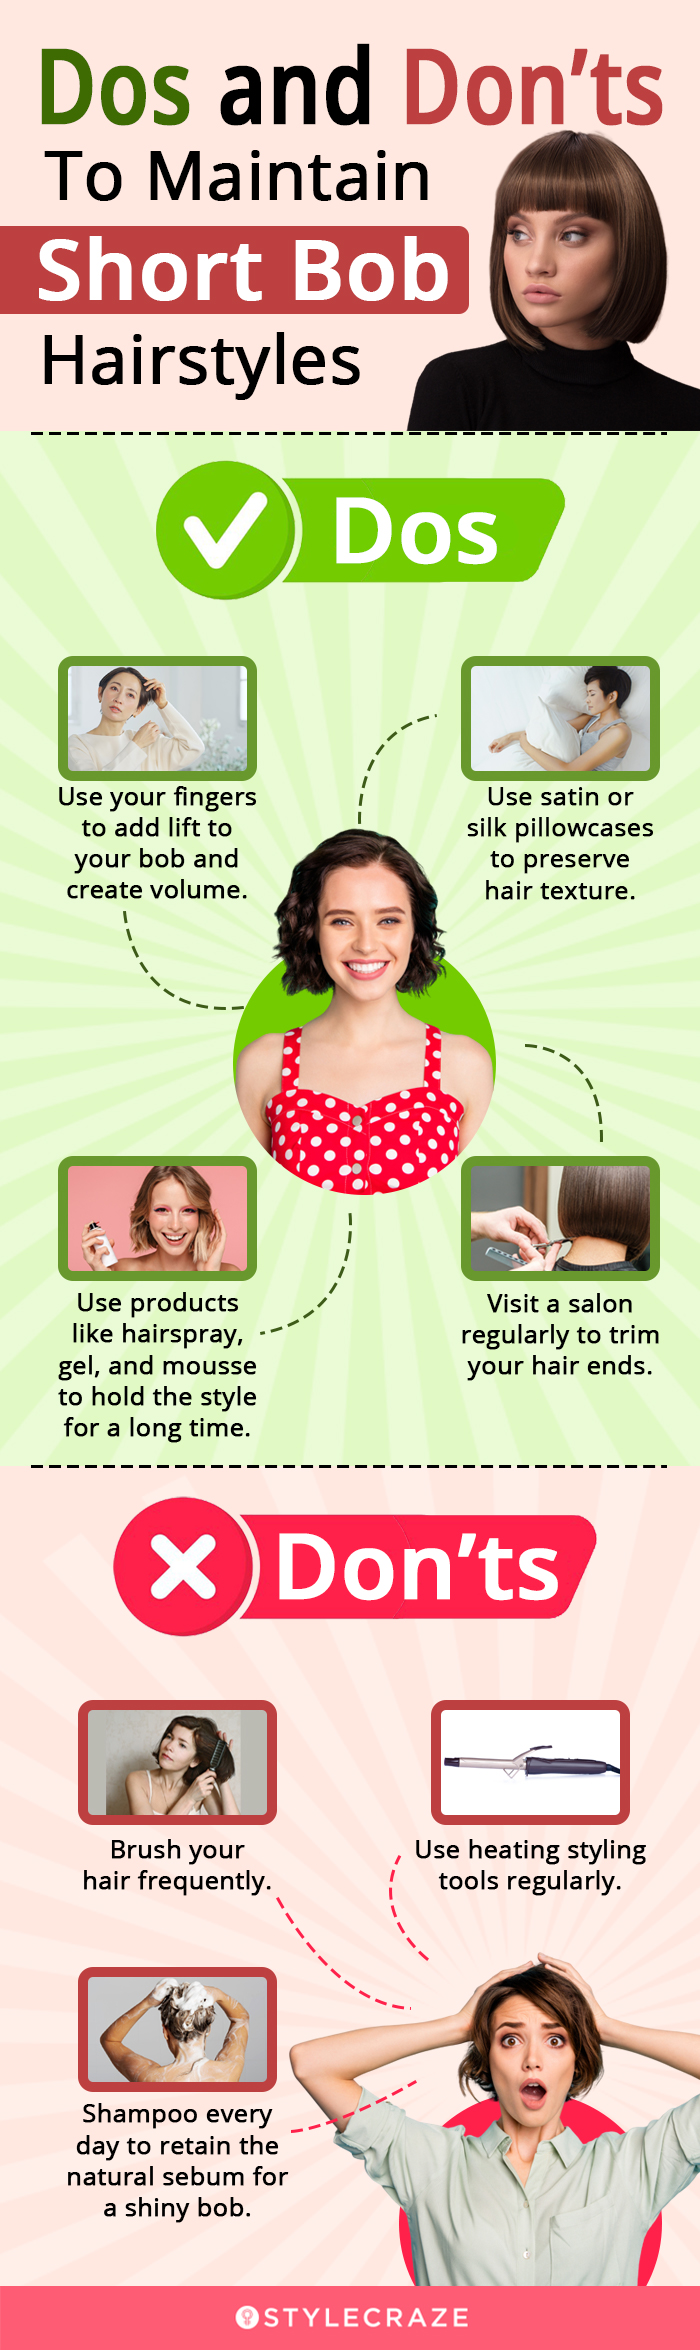 dos and don’ts to maintain short bob hairstyles (infographic)